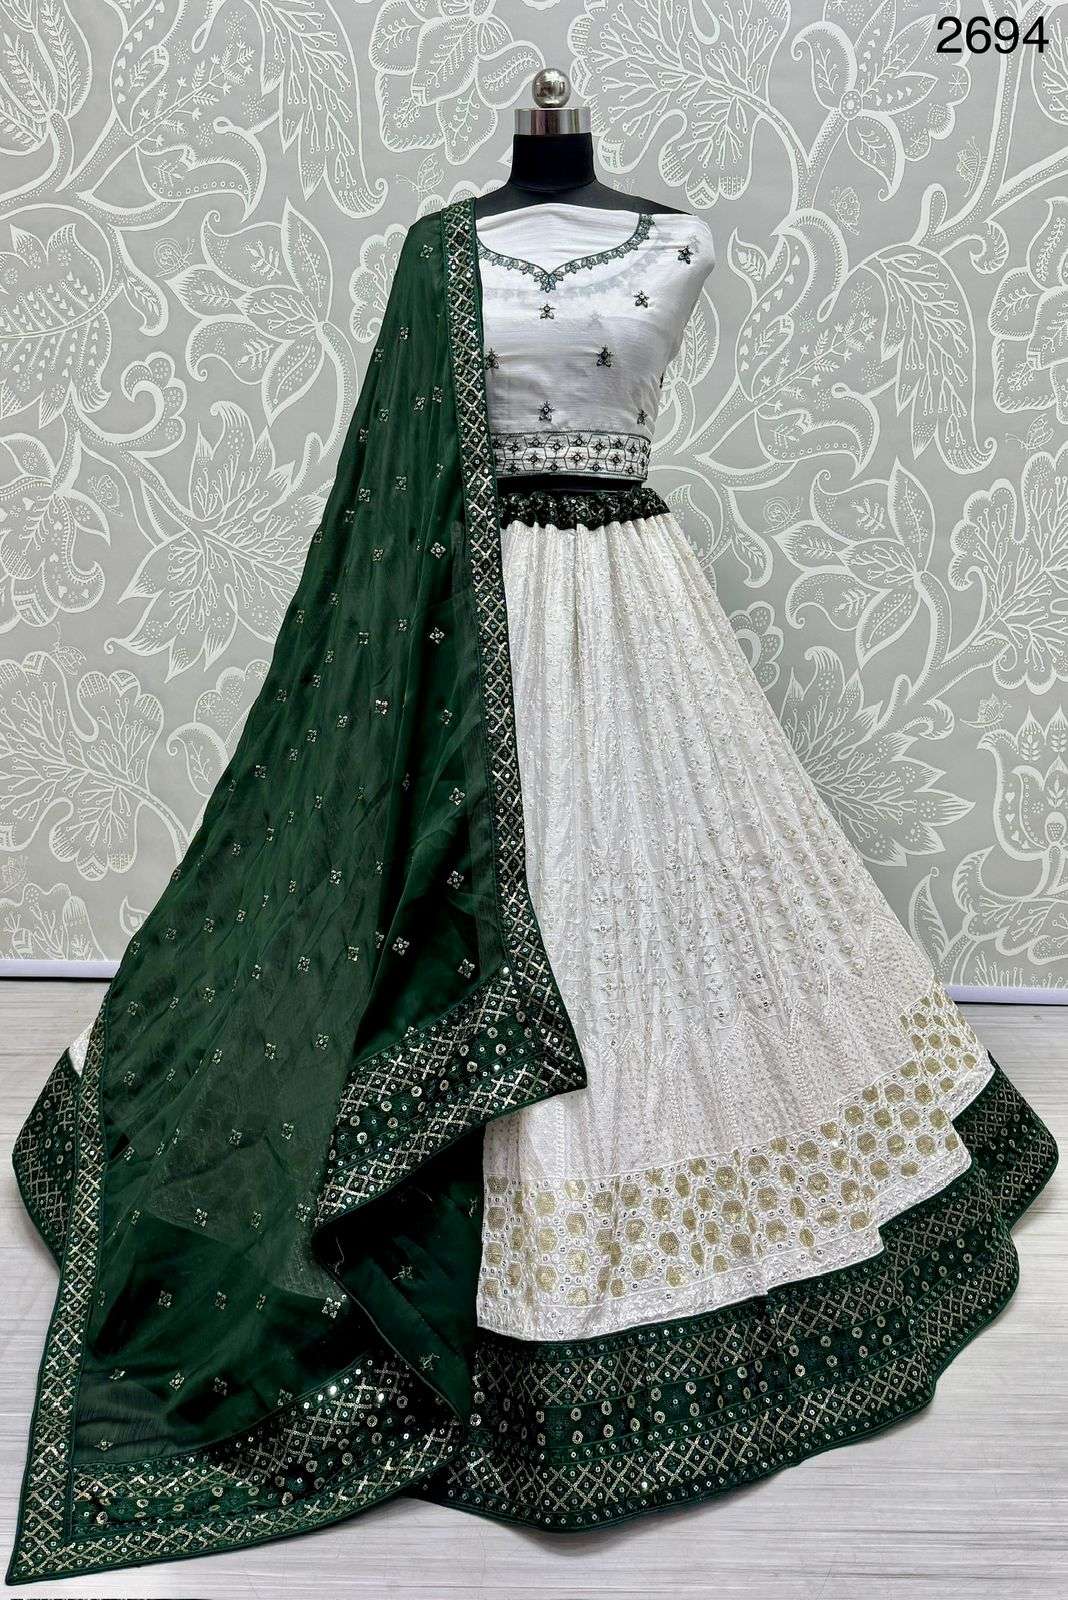 A-2694 COLOUR BY ASLIWHOLESALE DESIGNER GEORGETTE EMBROIDERY LEHENGAS